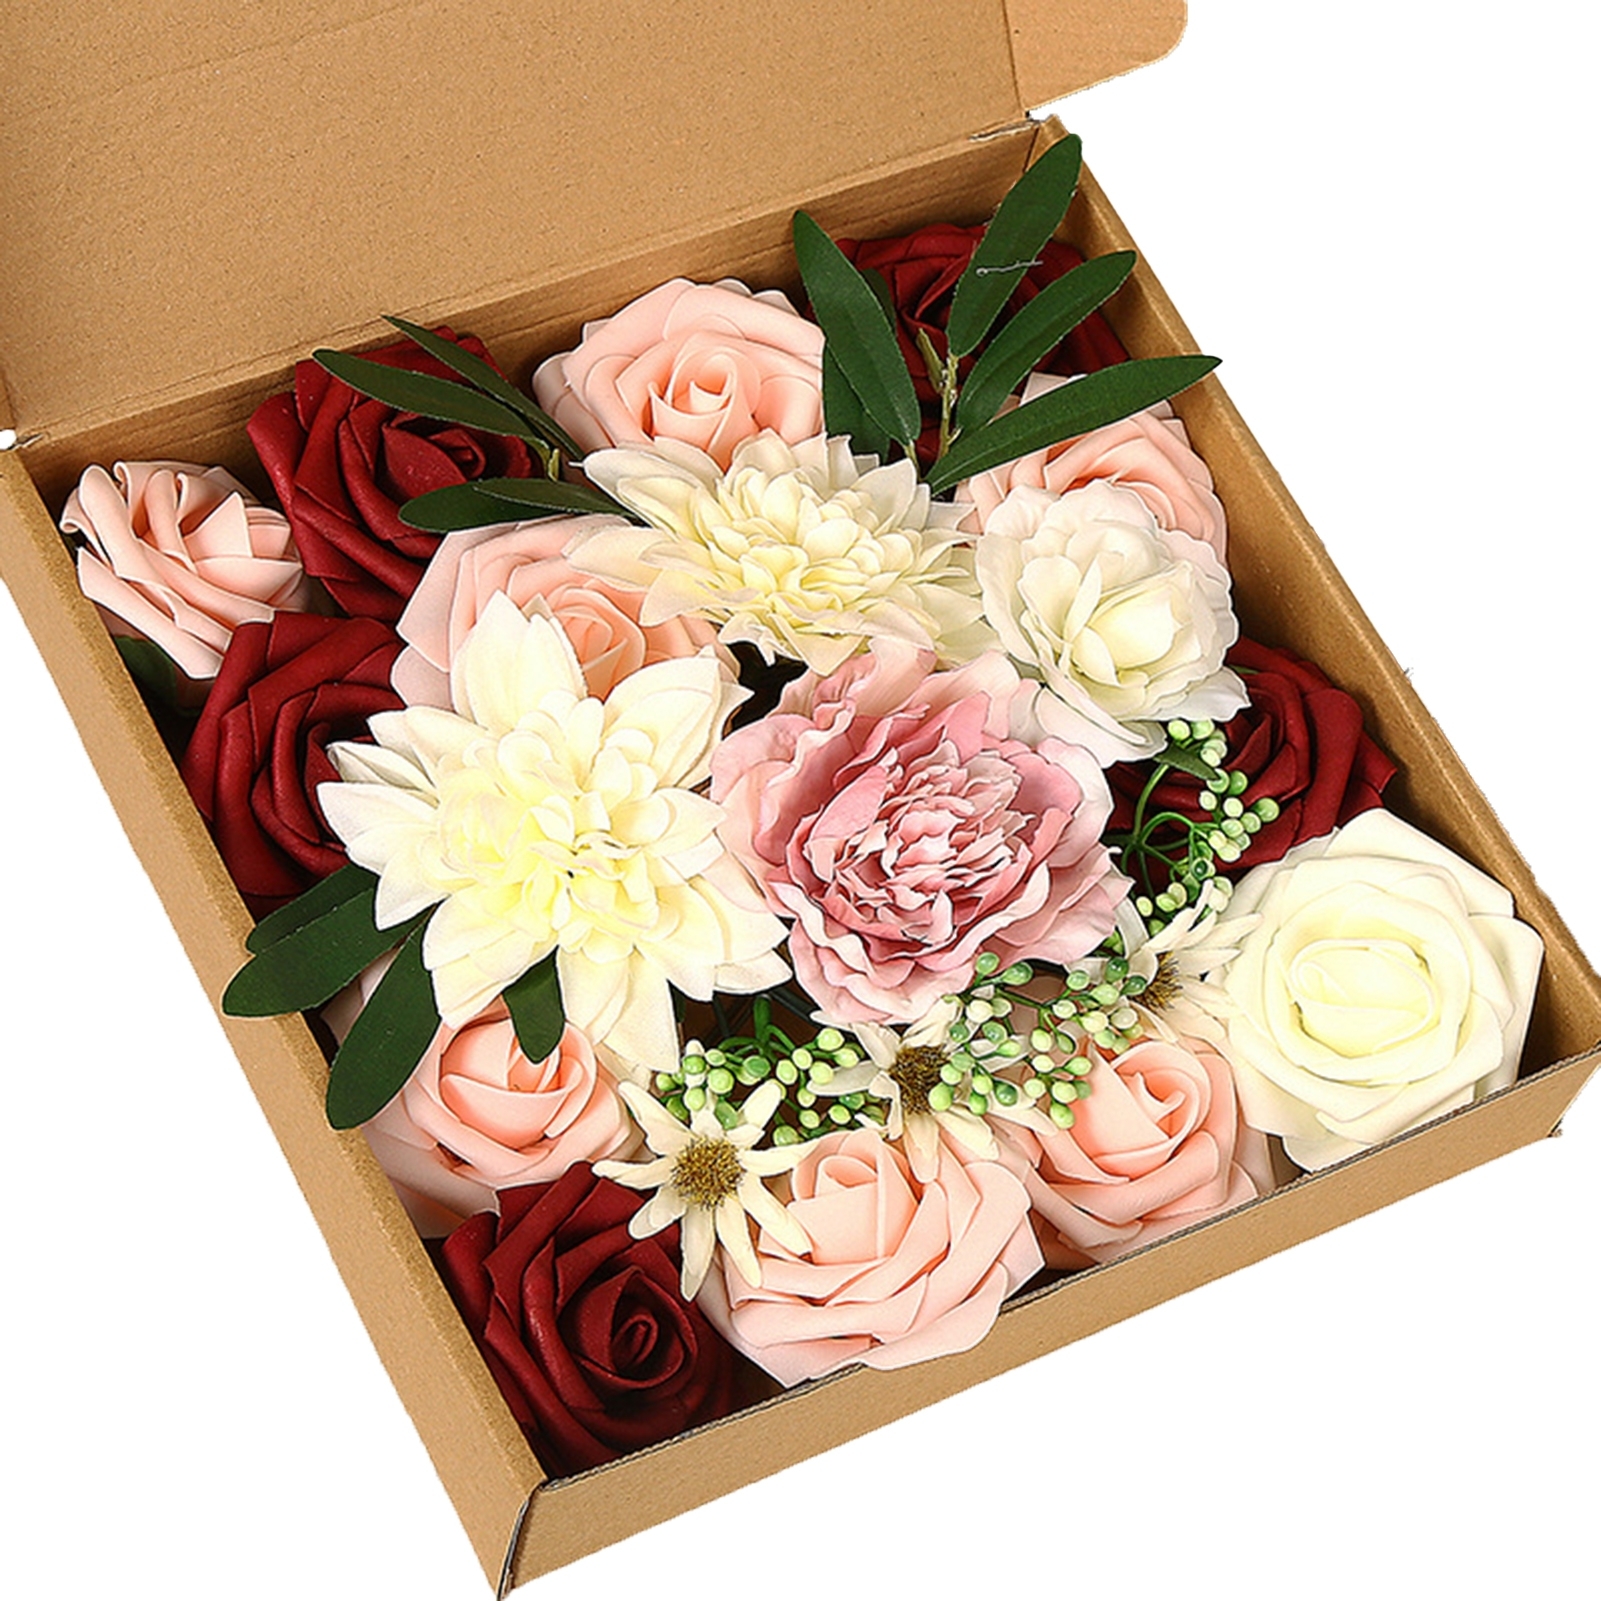 1 Box Beautiful Realistic Artificial Flower Faux Silk Flower Vivid Fine Texture Simulation Rose Wedding Accessories - red white